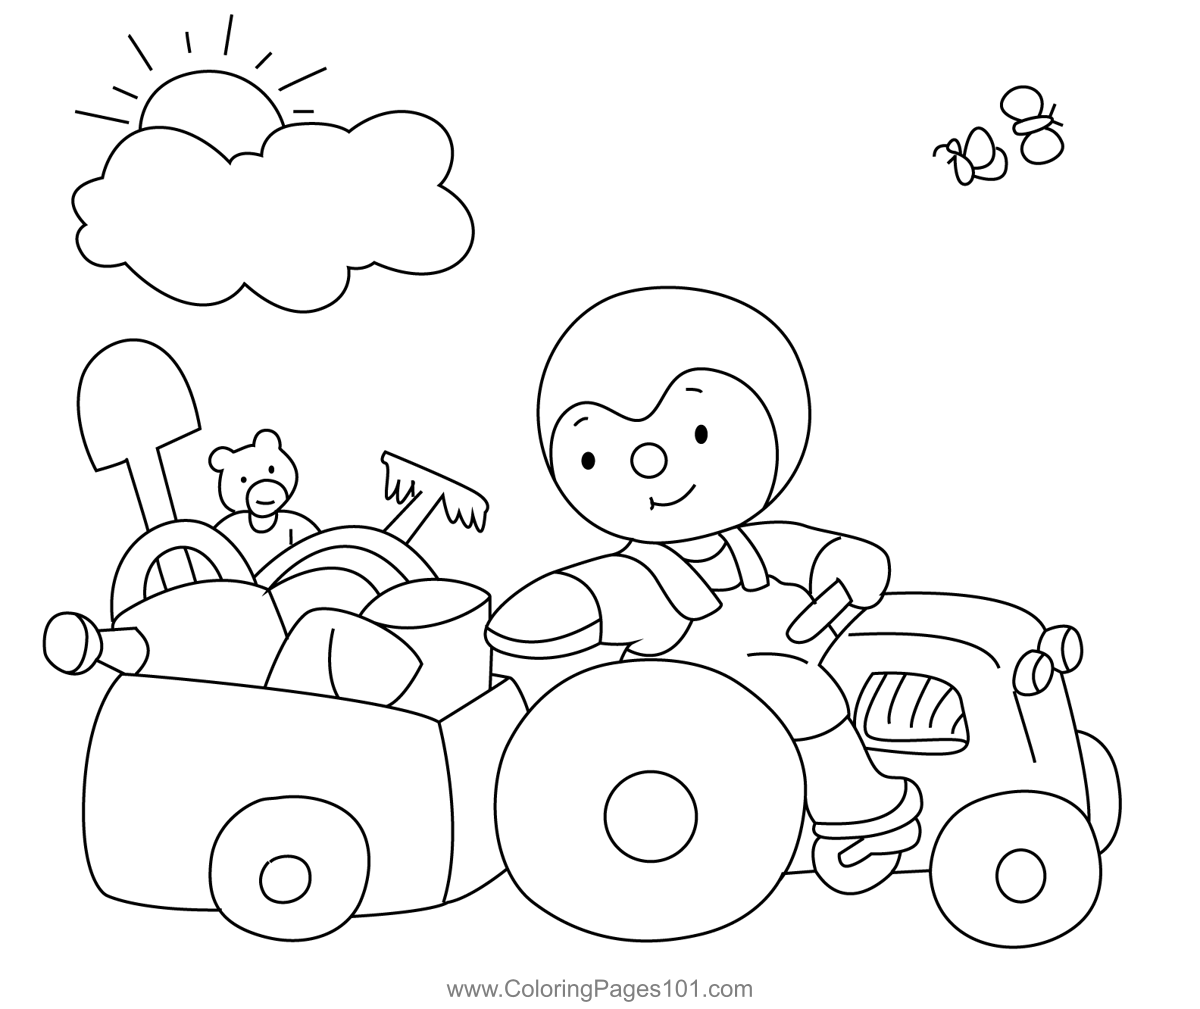 Charley Enjoying Holiday Coloring Page for Kids - Free Charley and ...